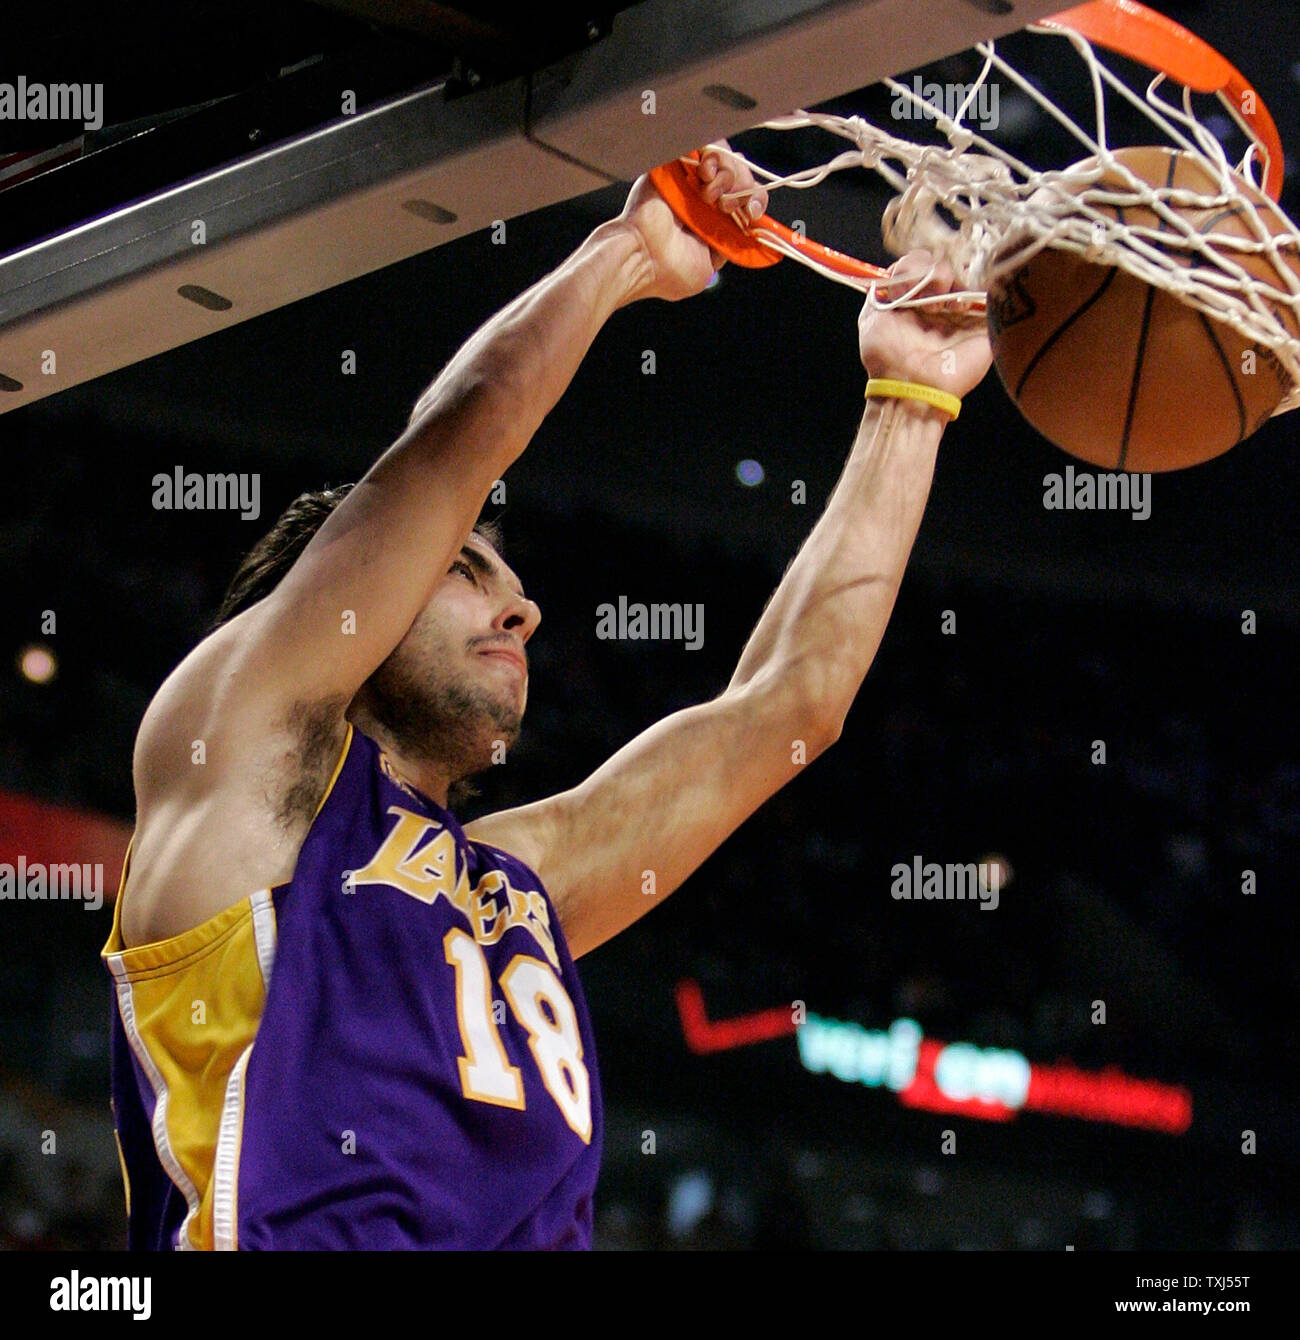 Los Angeles Lakers' Sasha Vujacic (18) dunks during the second quarter against the Chicago Bulls in Chicago on December 18, 2007. The Lakers won 103-91. (UPI Photo/Brian Kersey) Stock Photo